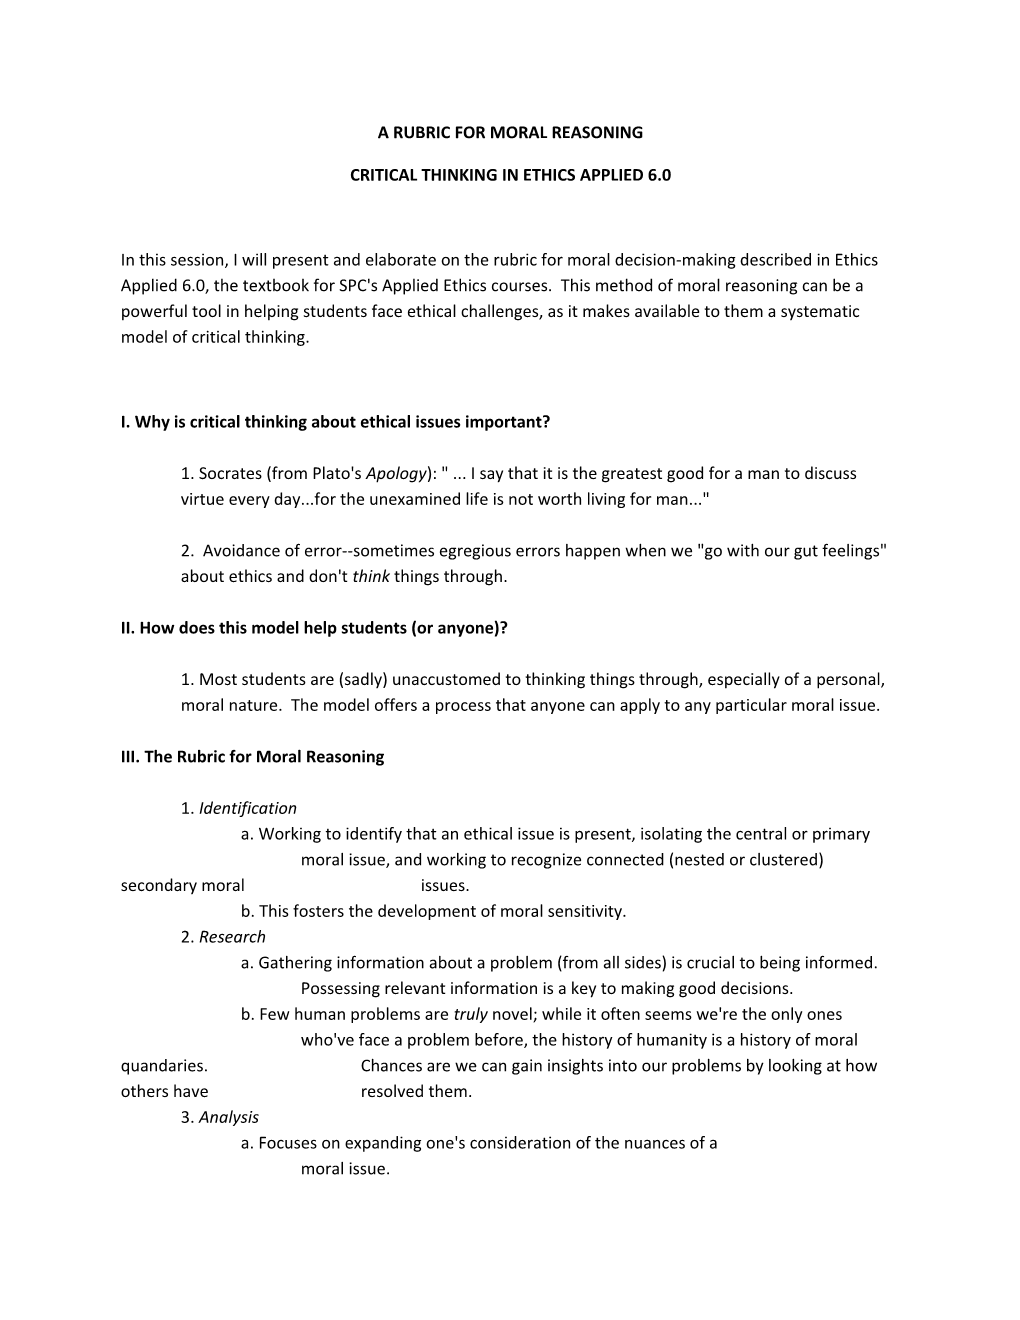 A Rubric for Moral Reasoning